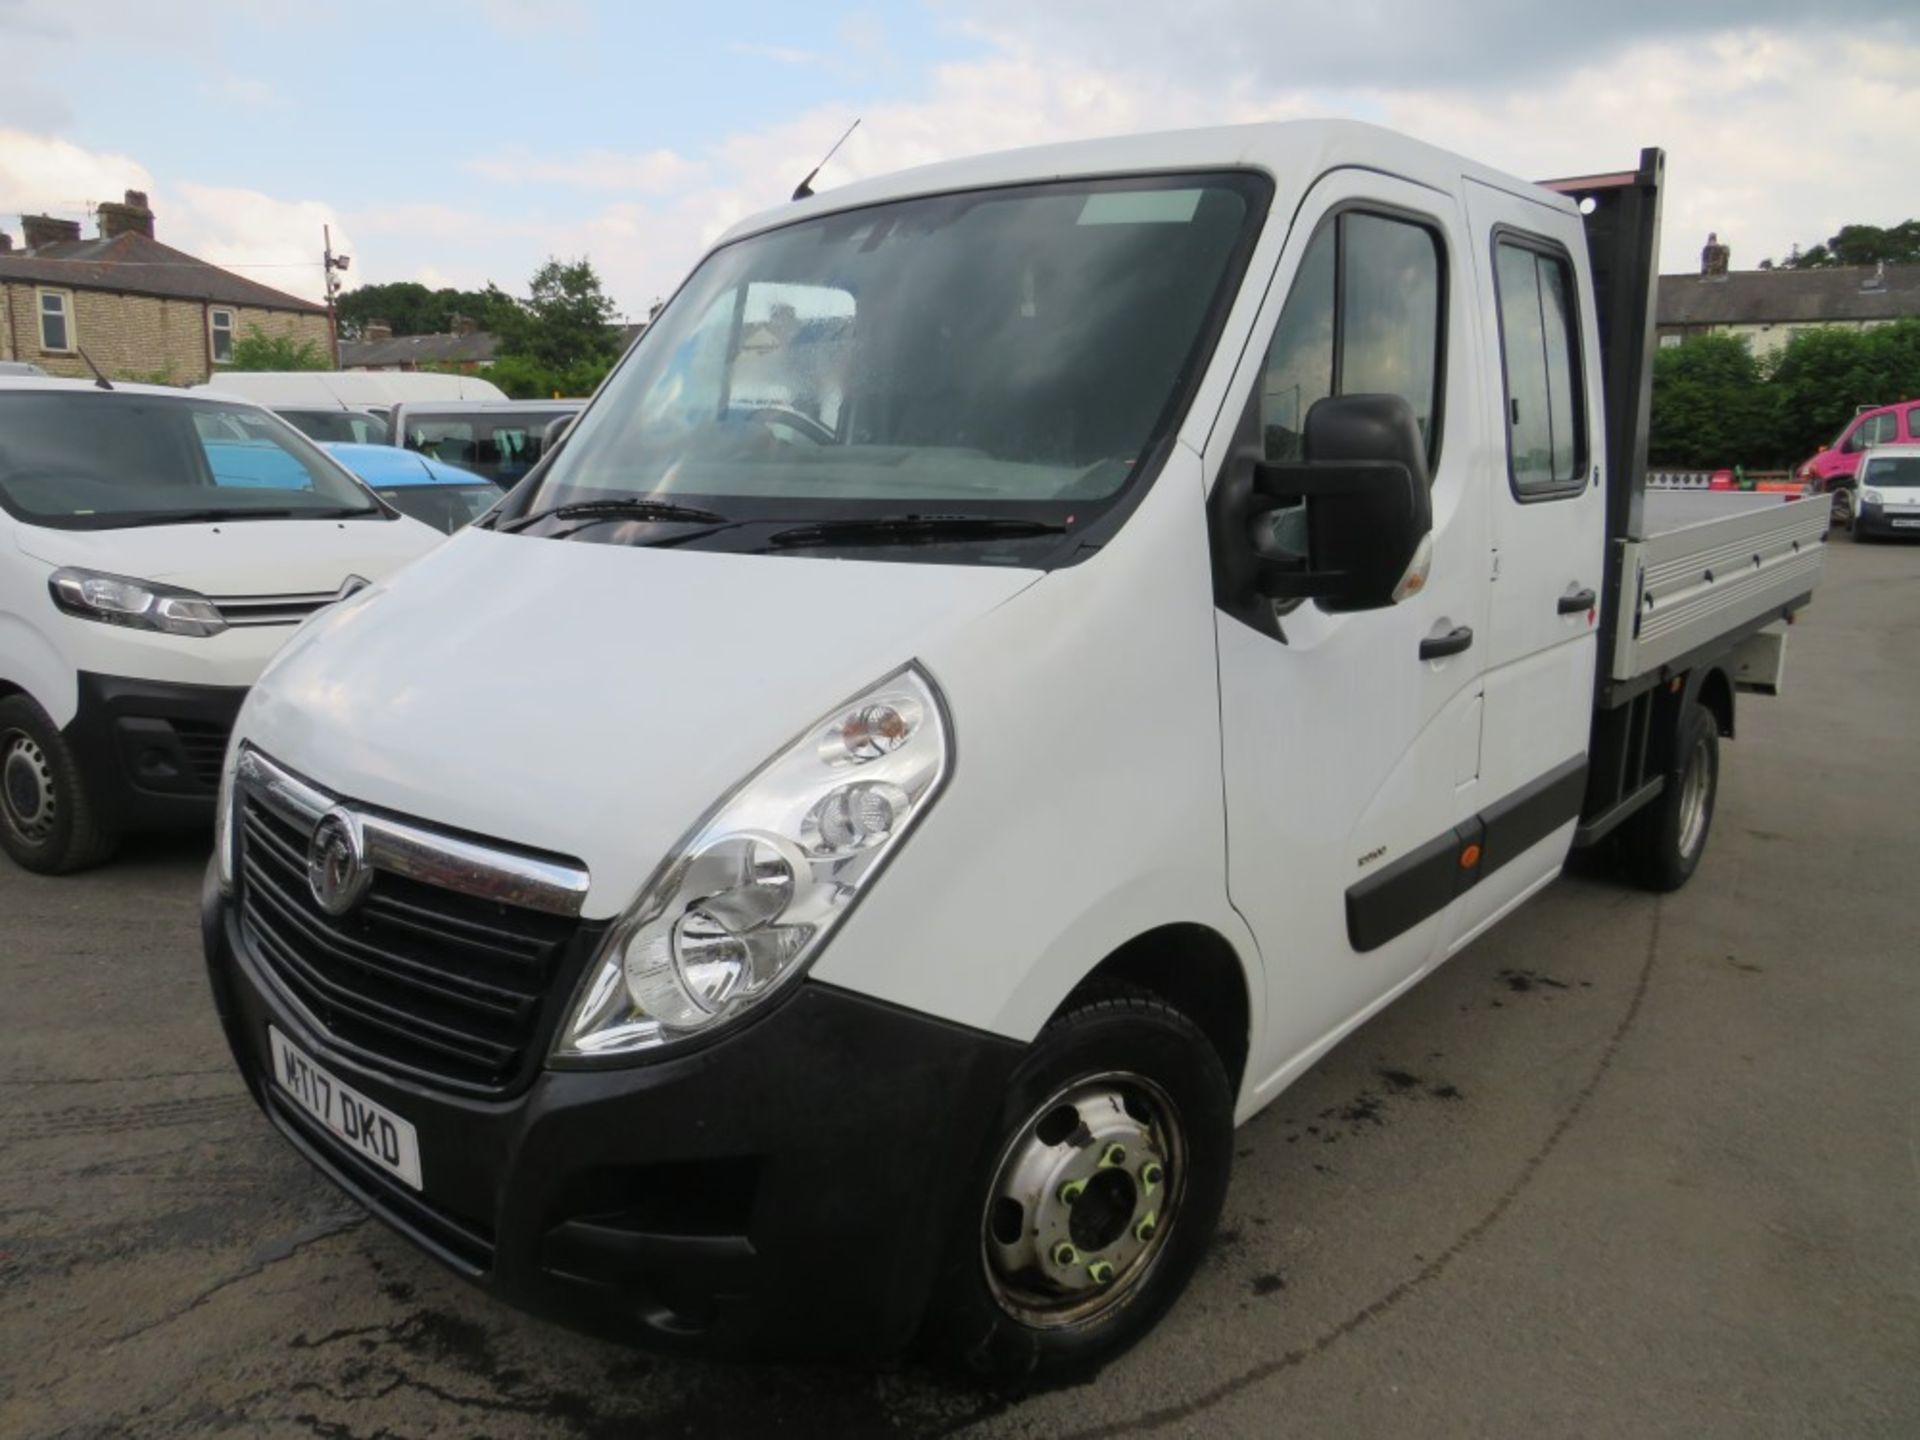 17 reg VAUXHALL MOVANO R3500 CDTI DROPSIDE - SELLING DUE TO IRON FILING FOUND IN OIL (DIRECT ELECTR - Image 2 of 7